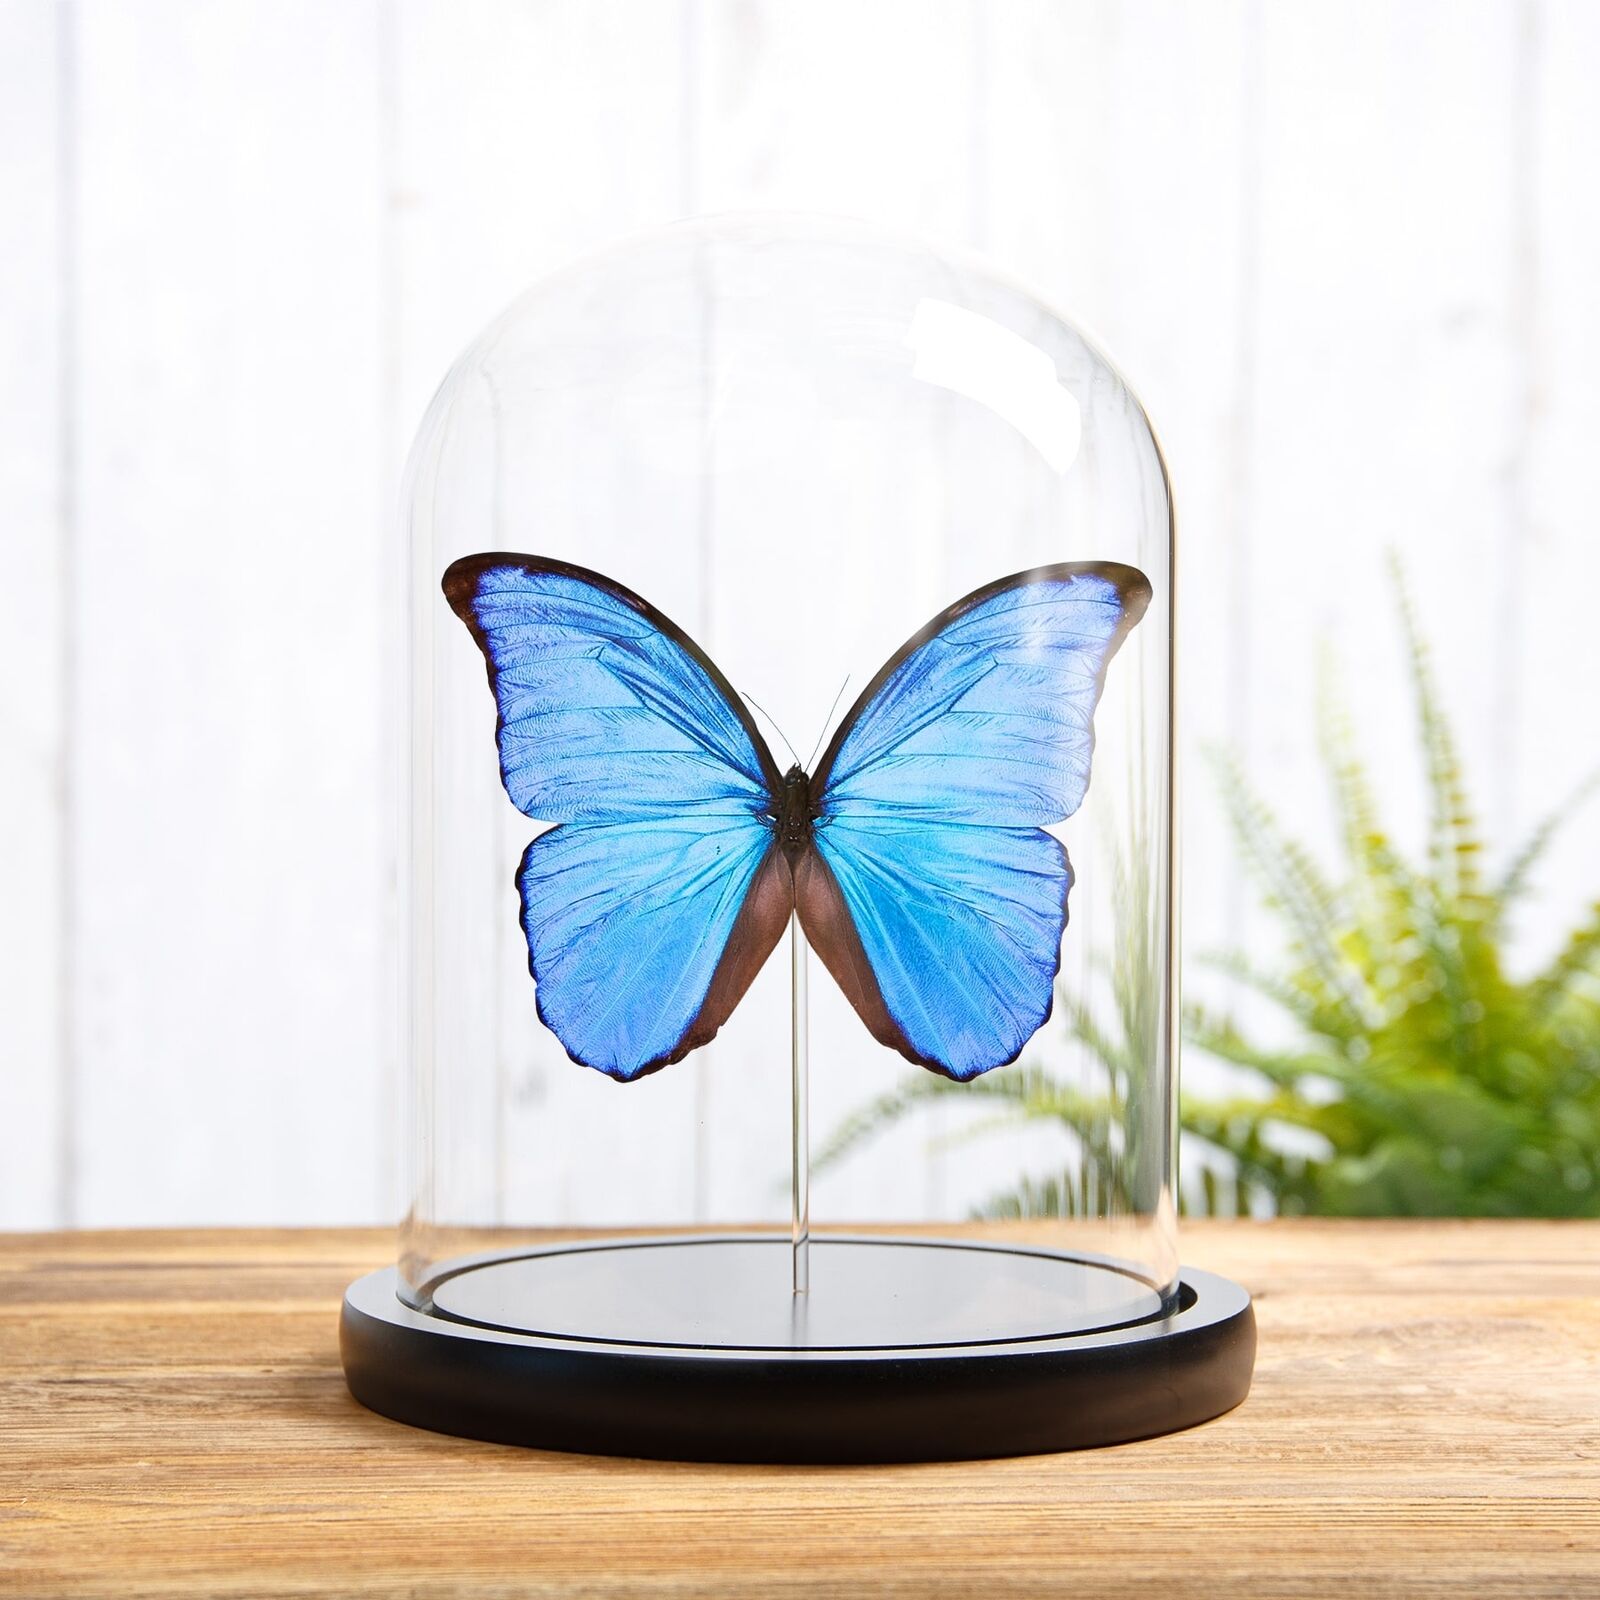 Blue Morpho Taxidermy Butterfly in Glass Dome (Morpho didius)